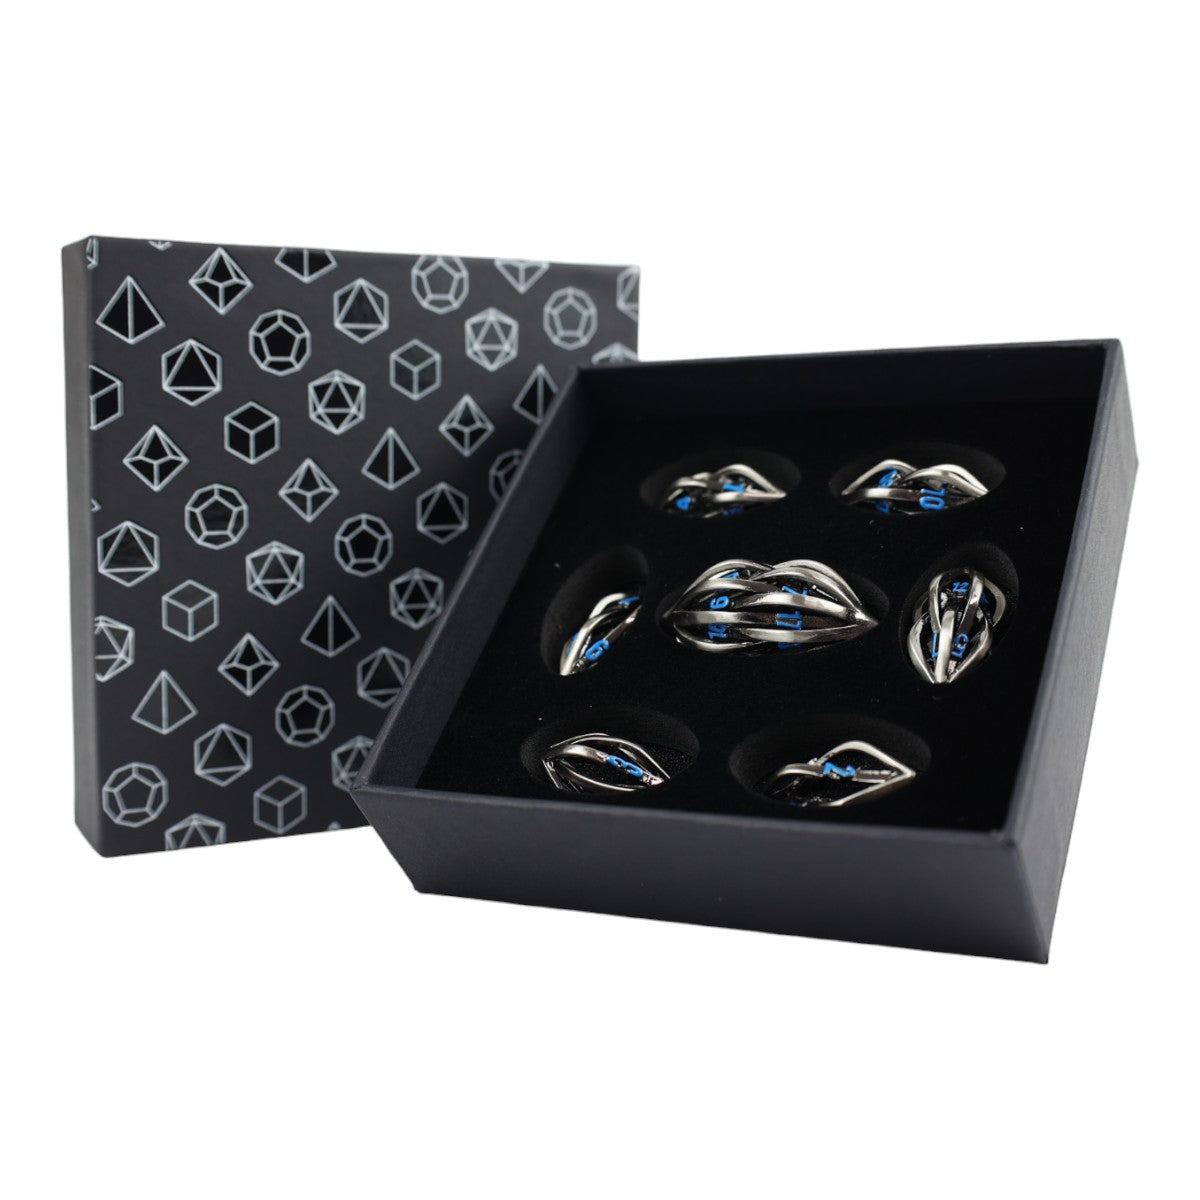 LPG Dice RPG Set Hollow Melon - Stainless and Blue